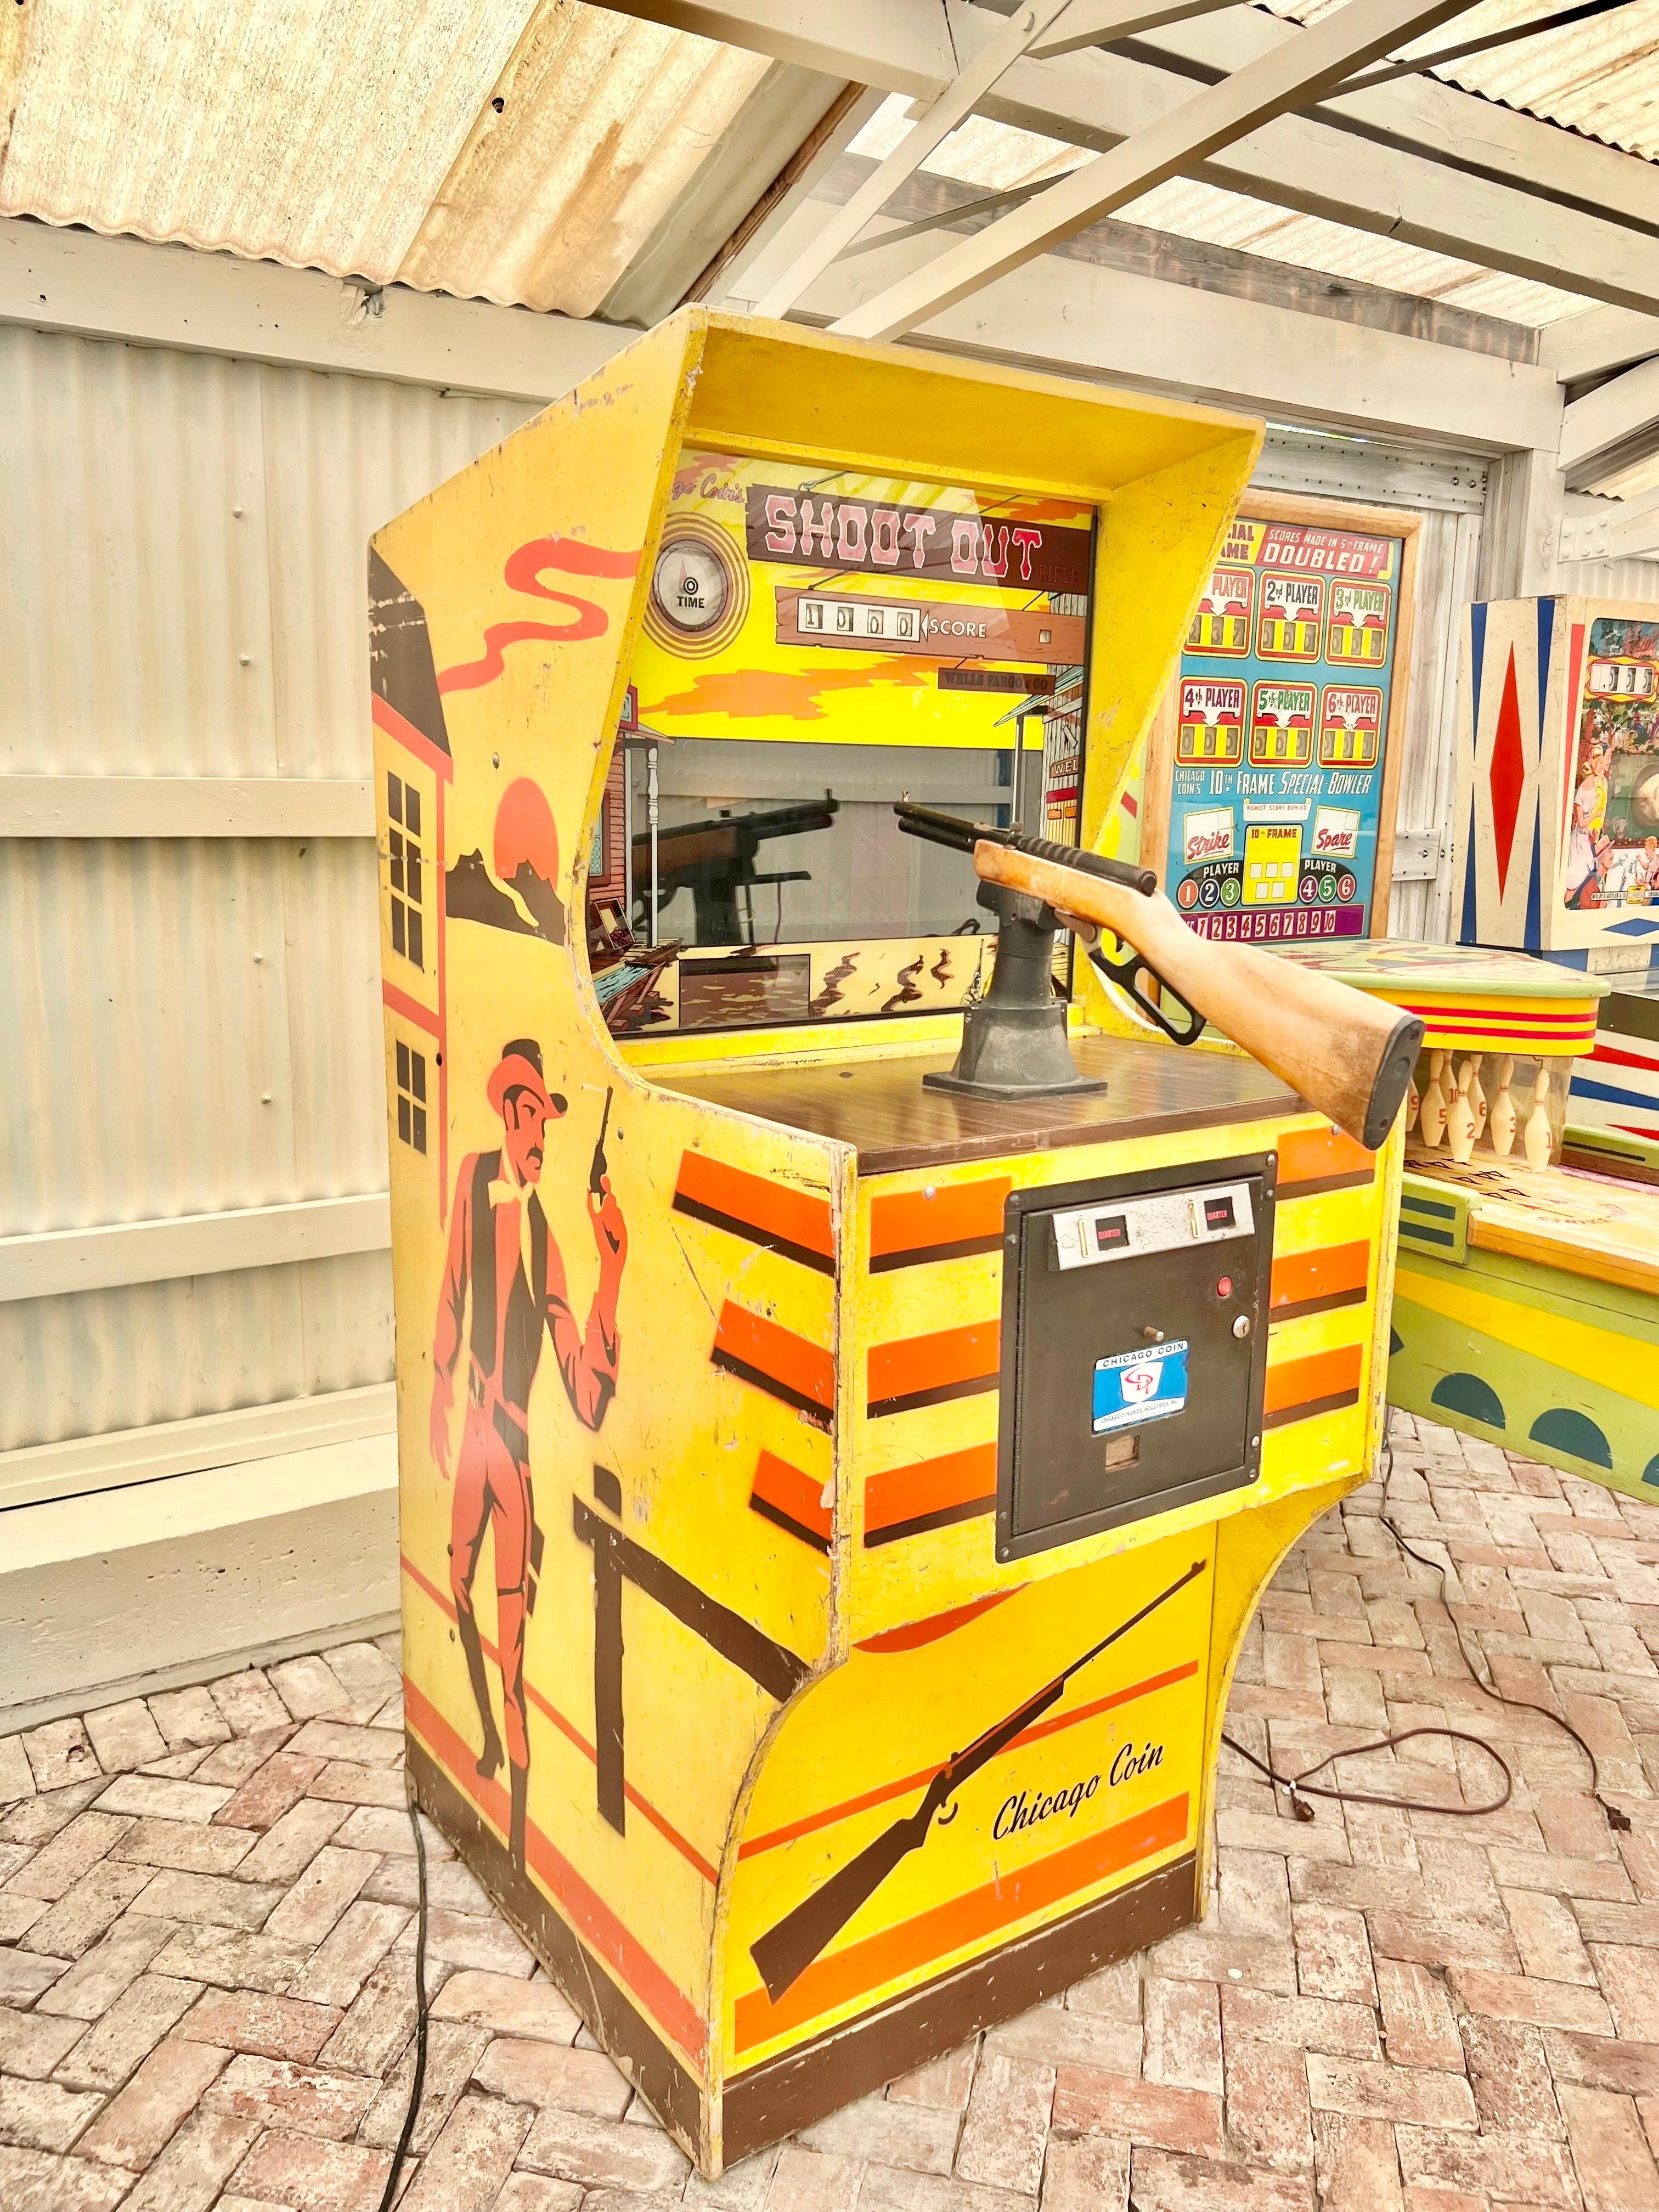 Vintage 1976 ‘Shoot Out’ arcade rifle game manufactured by Chicago Coin Machine Manufacturing Company. Large Dale-style gun game. This machine is housed in wood, painted bright yellow with a western theme stenciled throughout. The game is